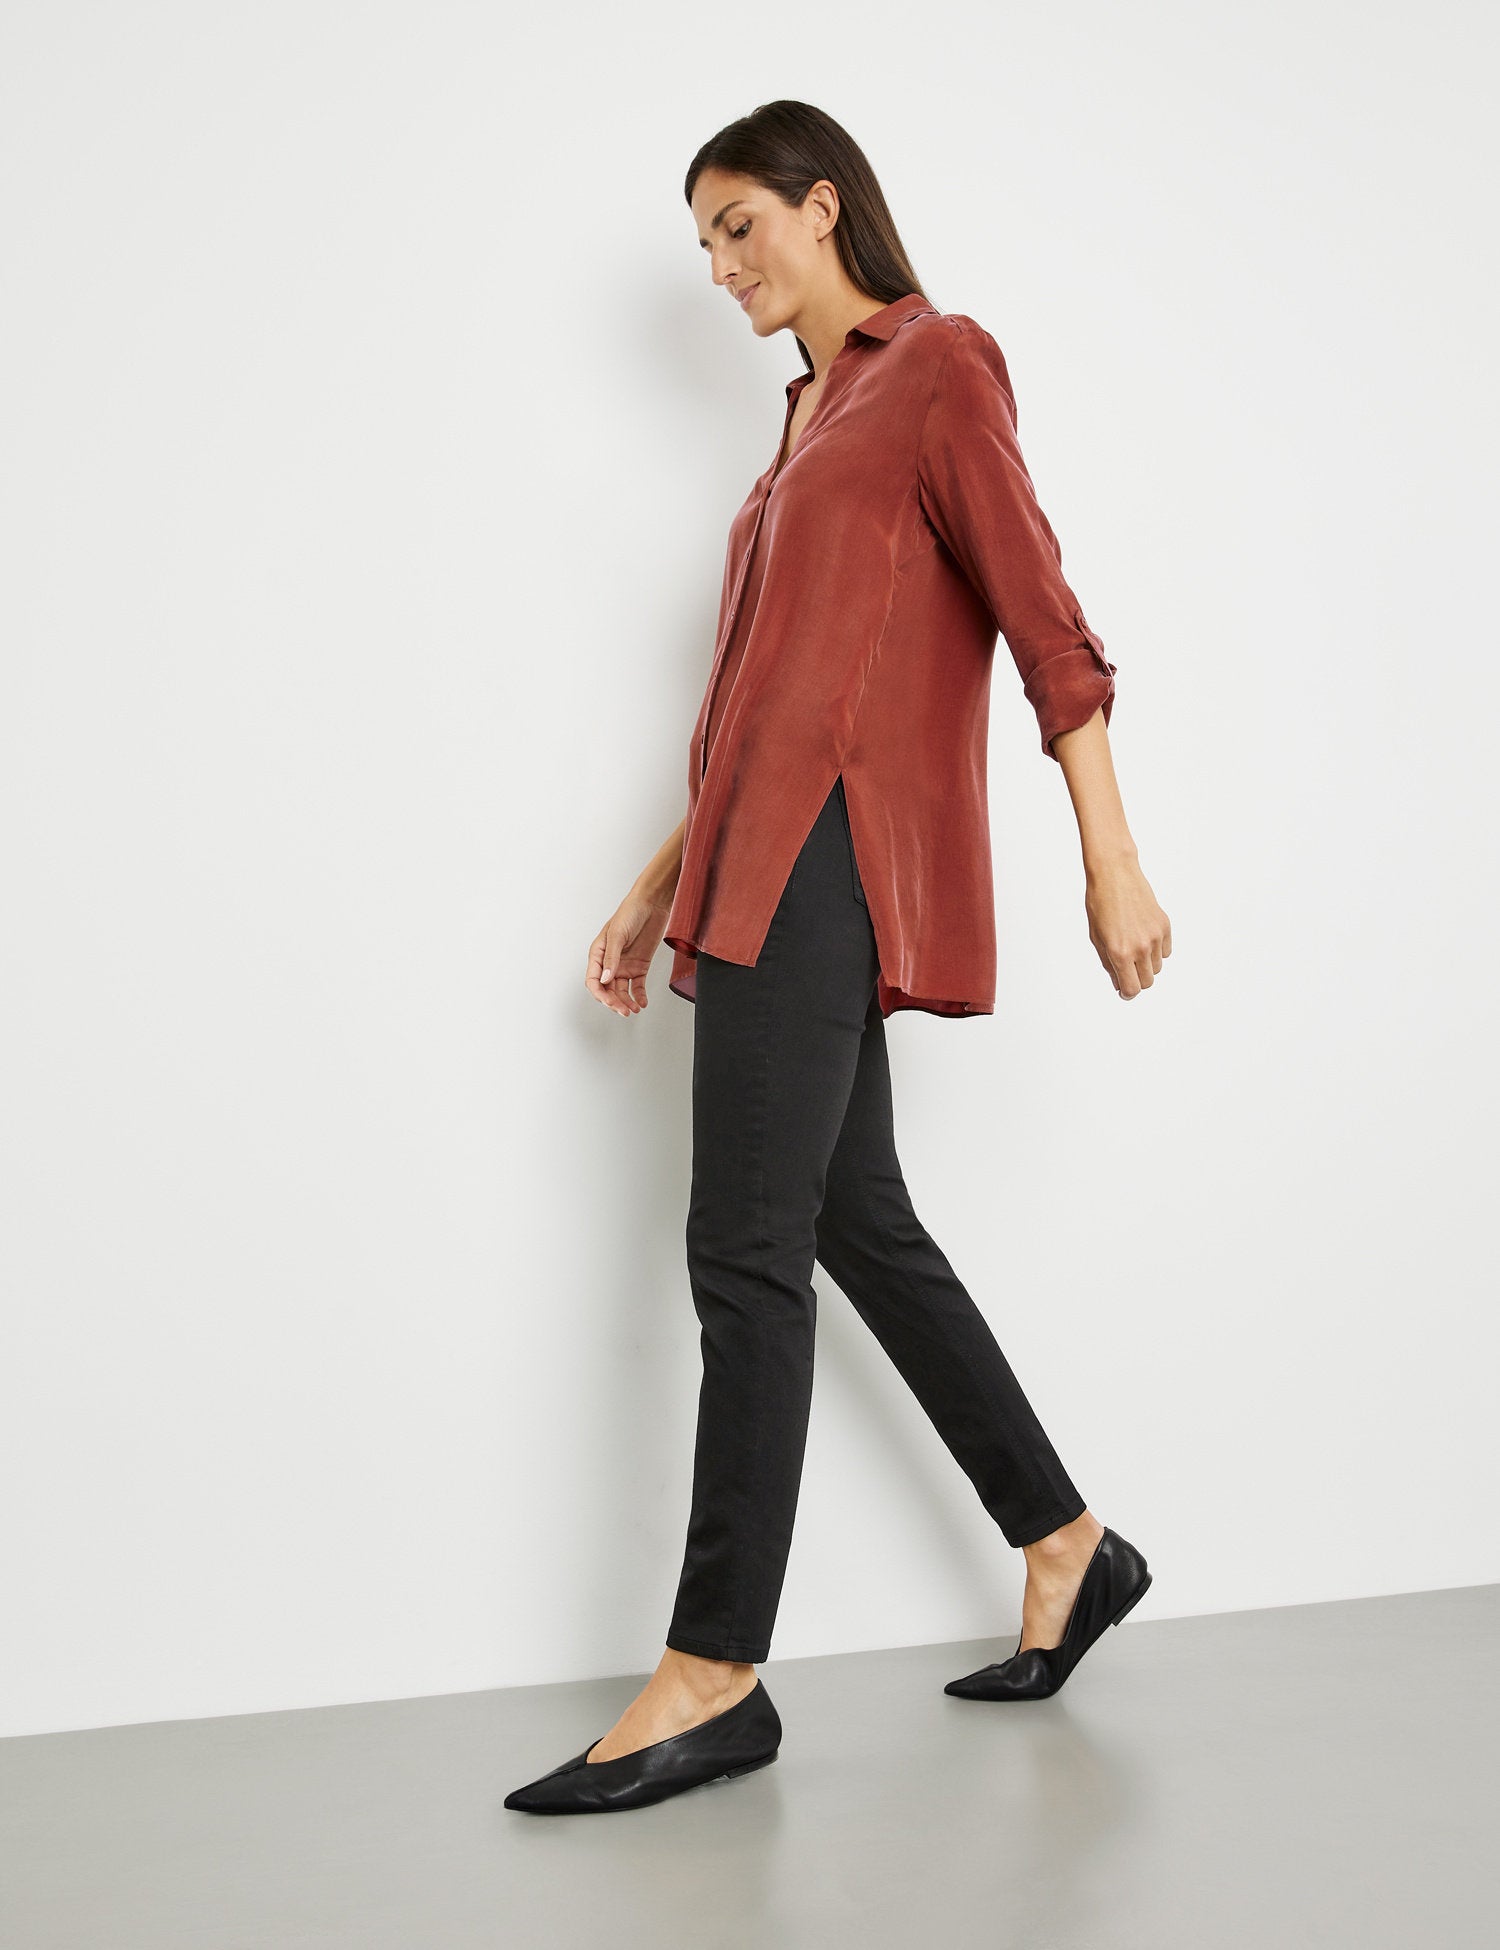 Long Blouse With Side Slits And Sleeve Straps_160019-66420_60703_05